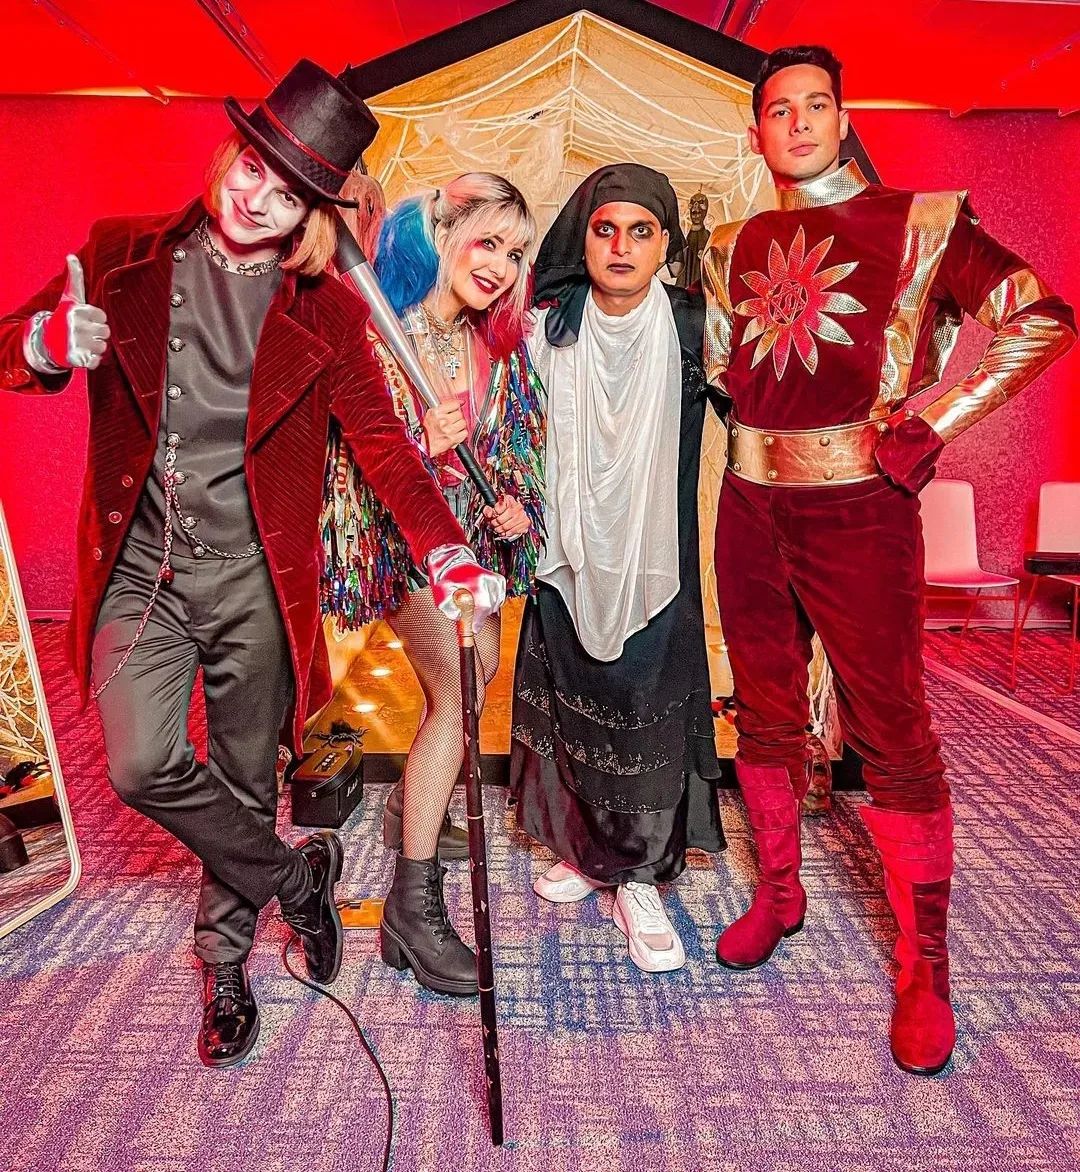 At the Halloween party, Katrina Kaif dressed up as Harley Quinn, Ishaan Khatter as Willy Wonka, and Siddhant Chaturvedi as Shaktimaan, India’s superhero.